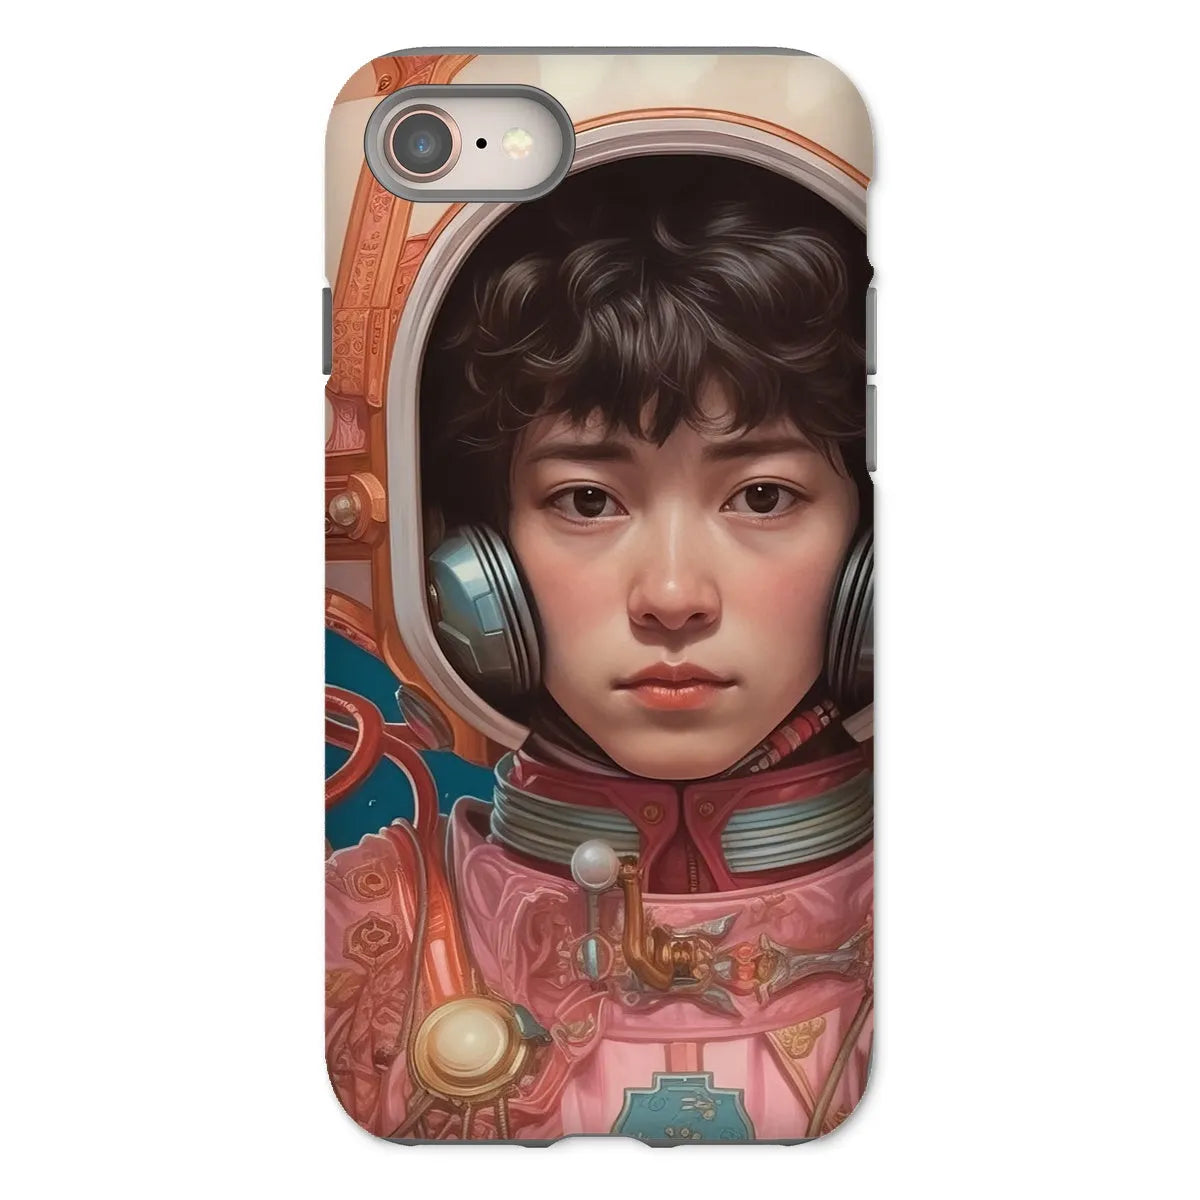 Kaito The Gay Astronaut - Lgbtq Art Phone Case - Iphone 8 / Matte - Mobile Phone Cases - Aesthetic Art